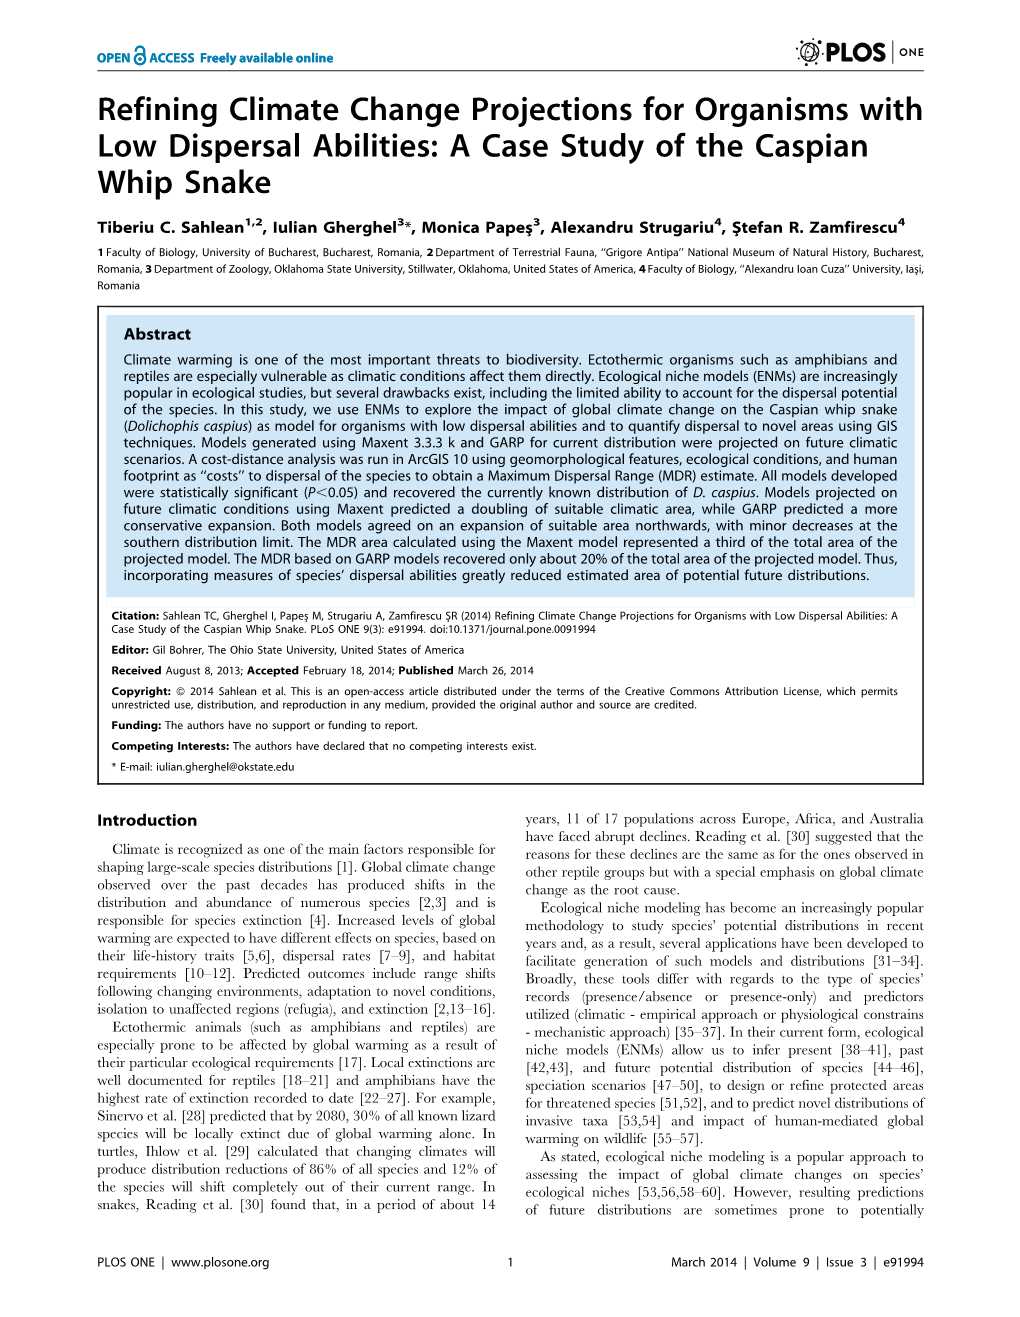 Refining Climate Change Projections for Organisms with Low Dispersal Abilities: a Case Study of the Caspian Whip Snake